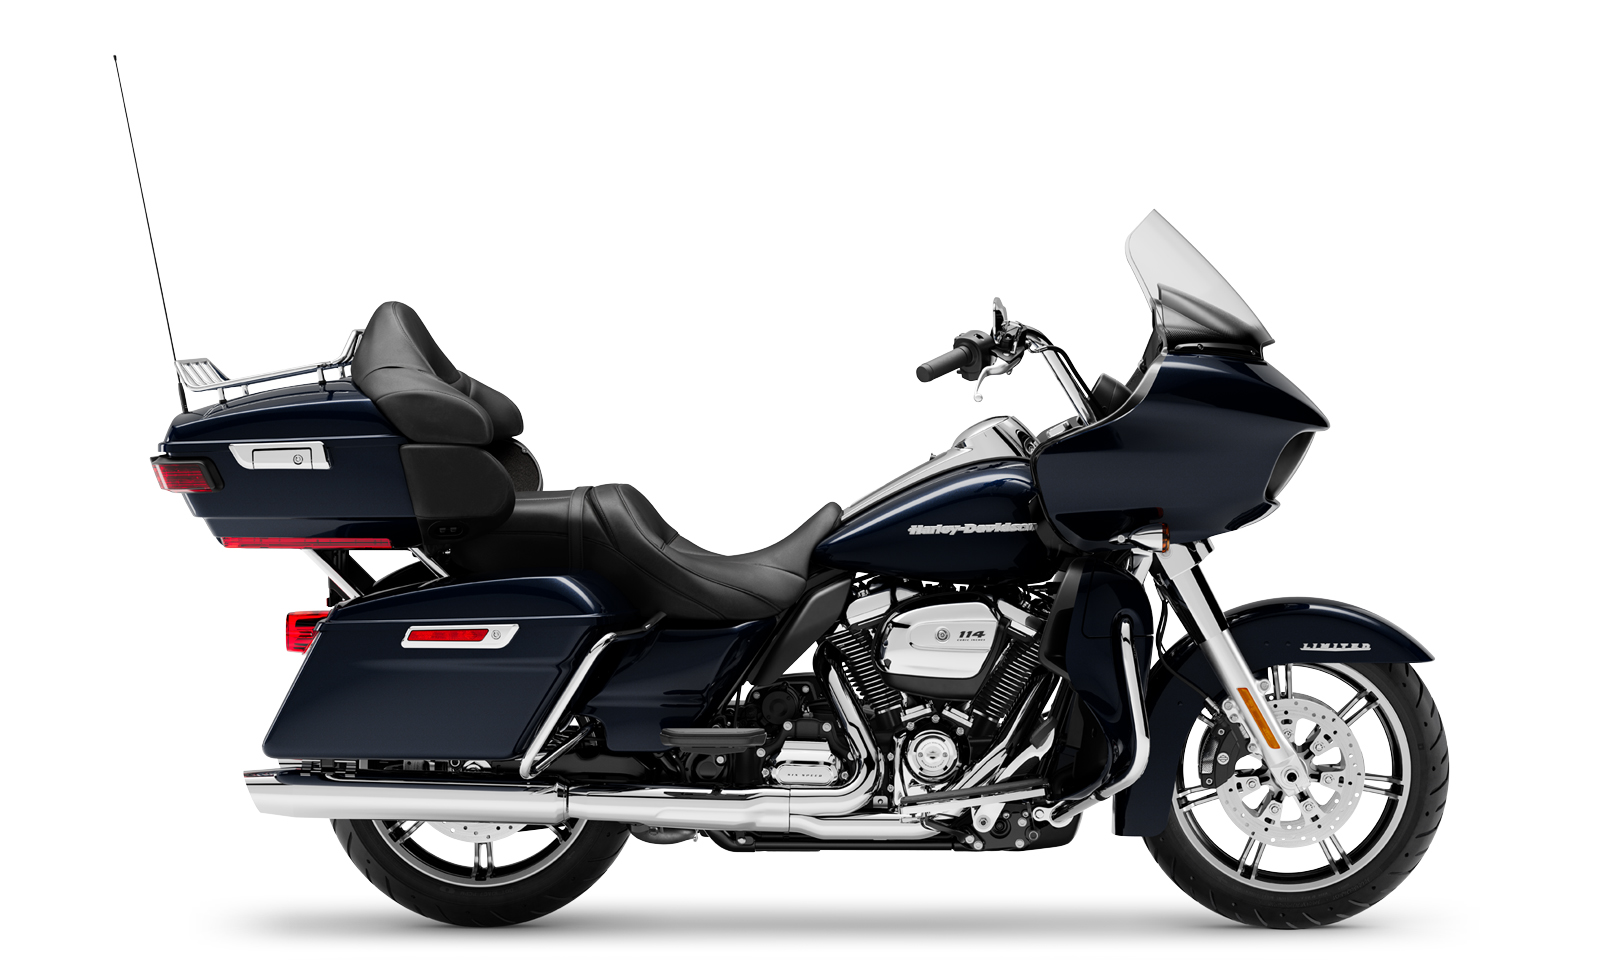 2020 Road Glide Limited Motorcycle Harley Davidson African Markets